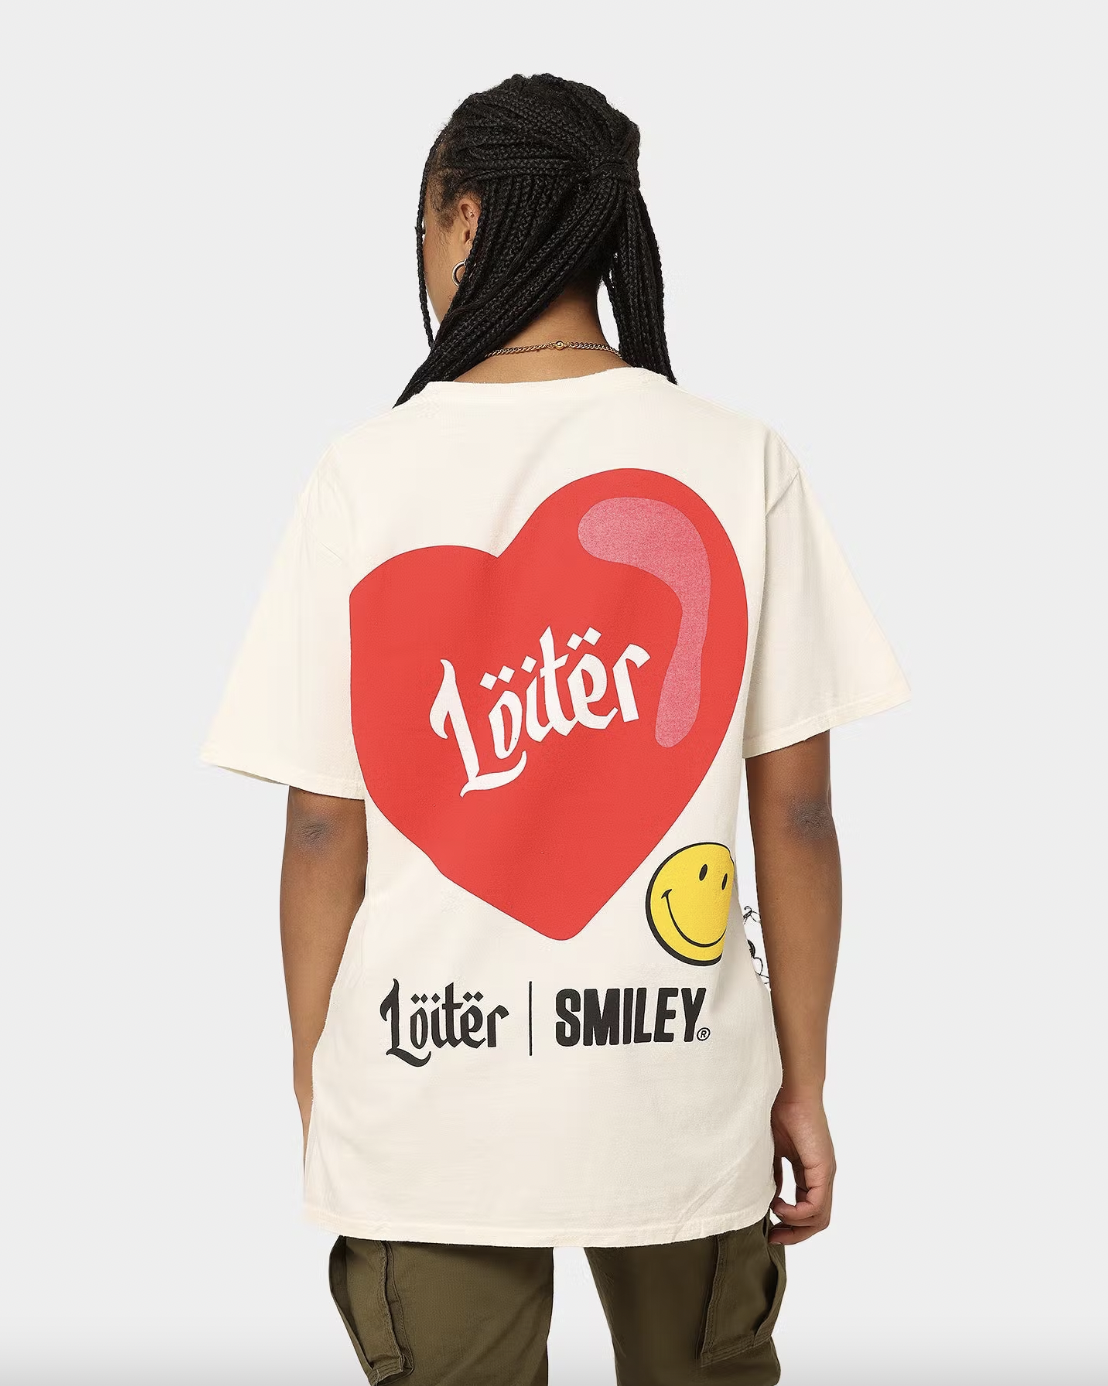 Loiter x Smiley T-shirt - view from behind